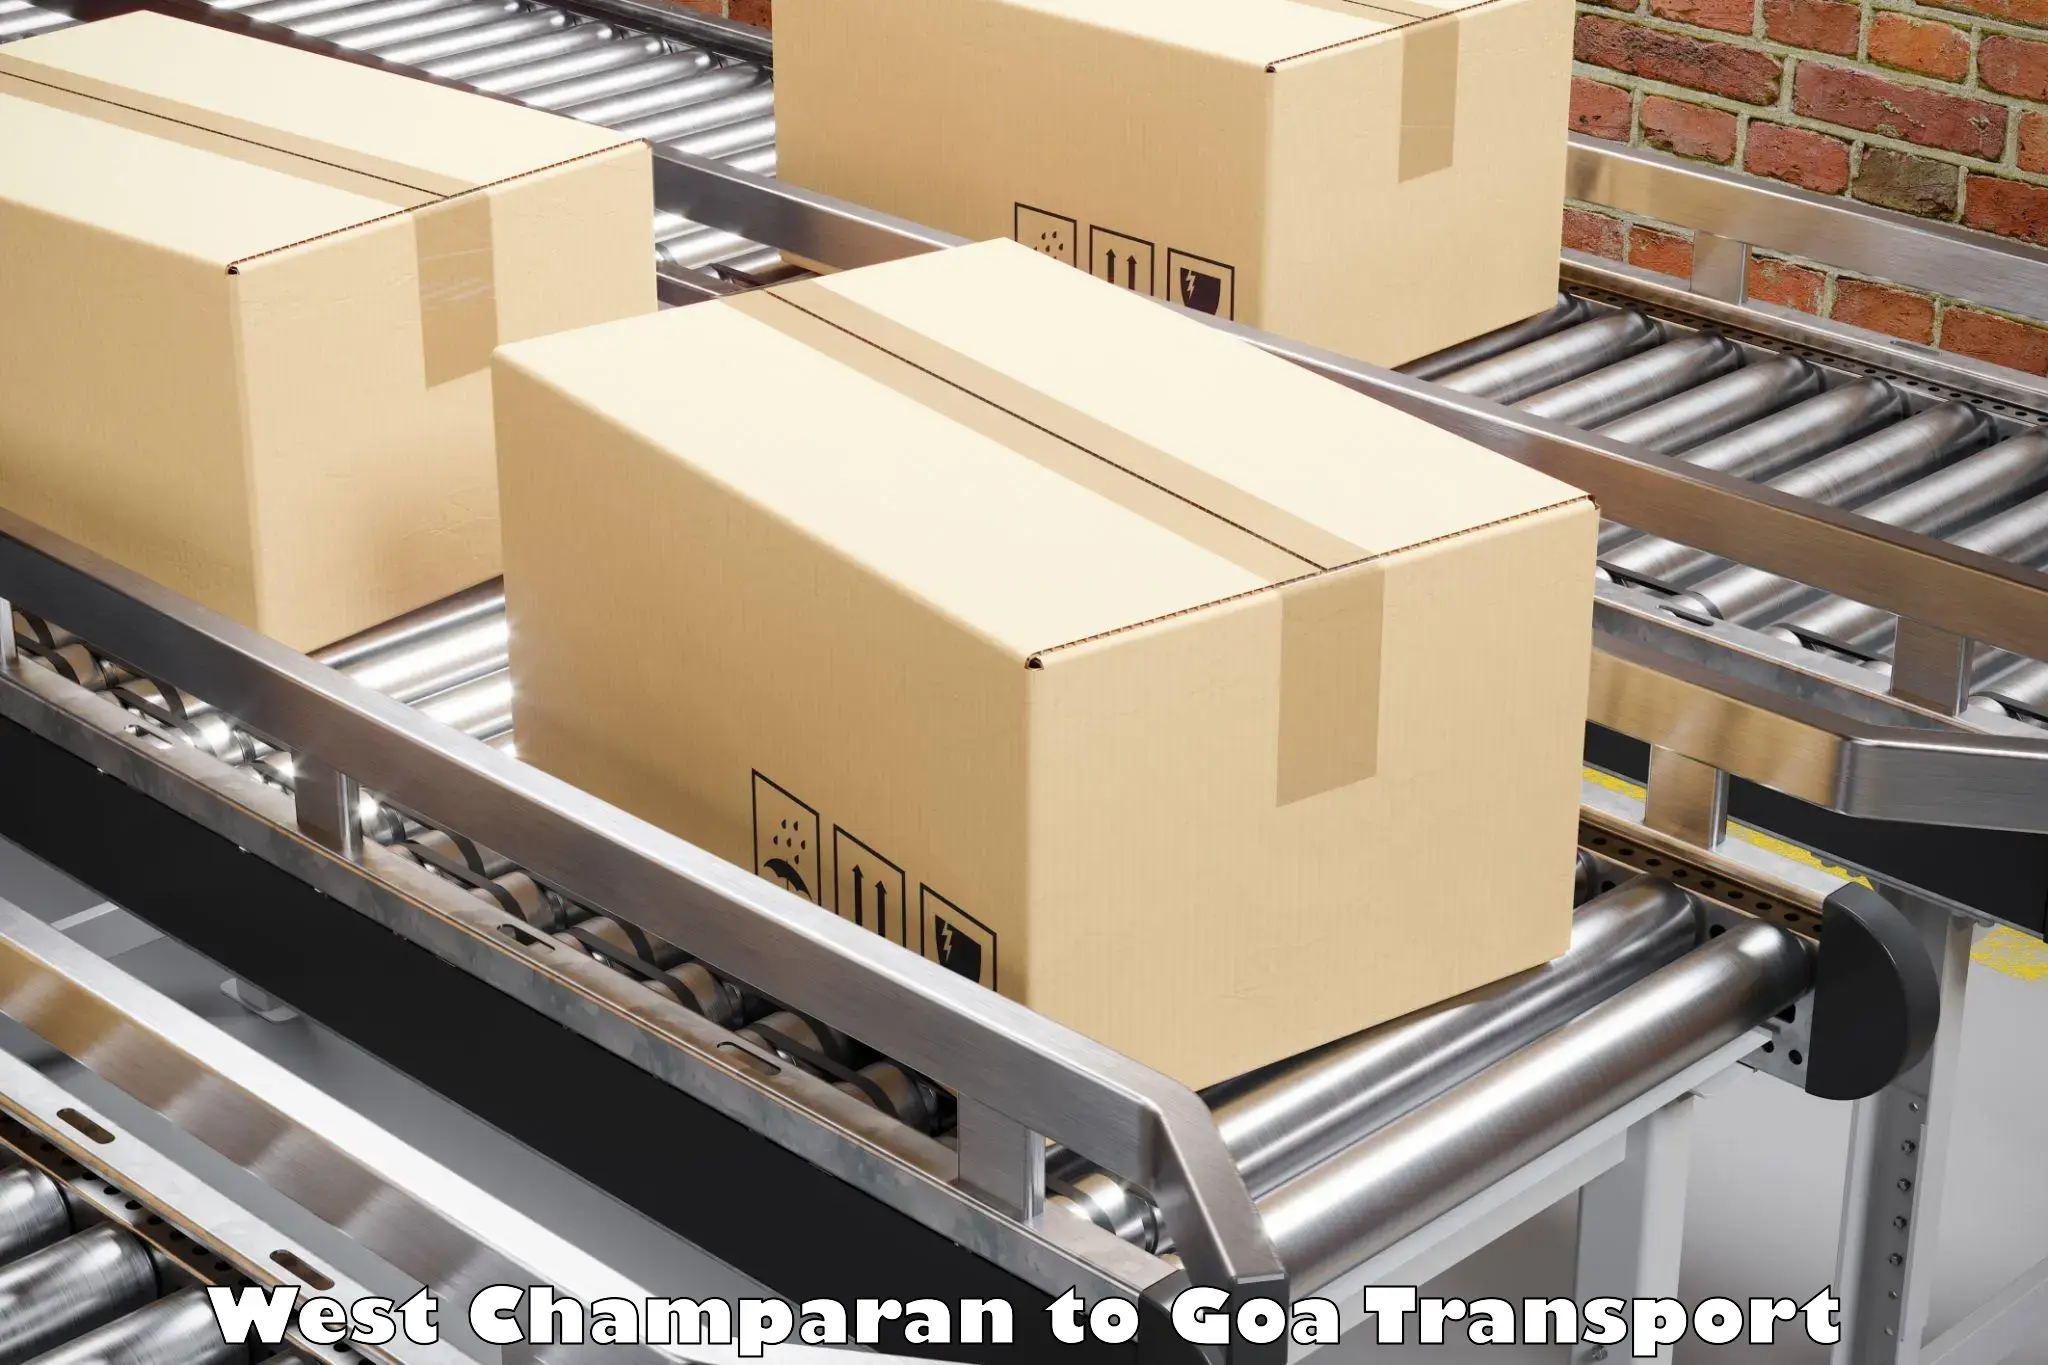 Daily parcel service transport West Champaran to IIT Goa